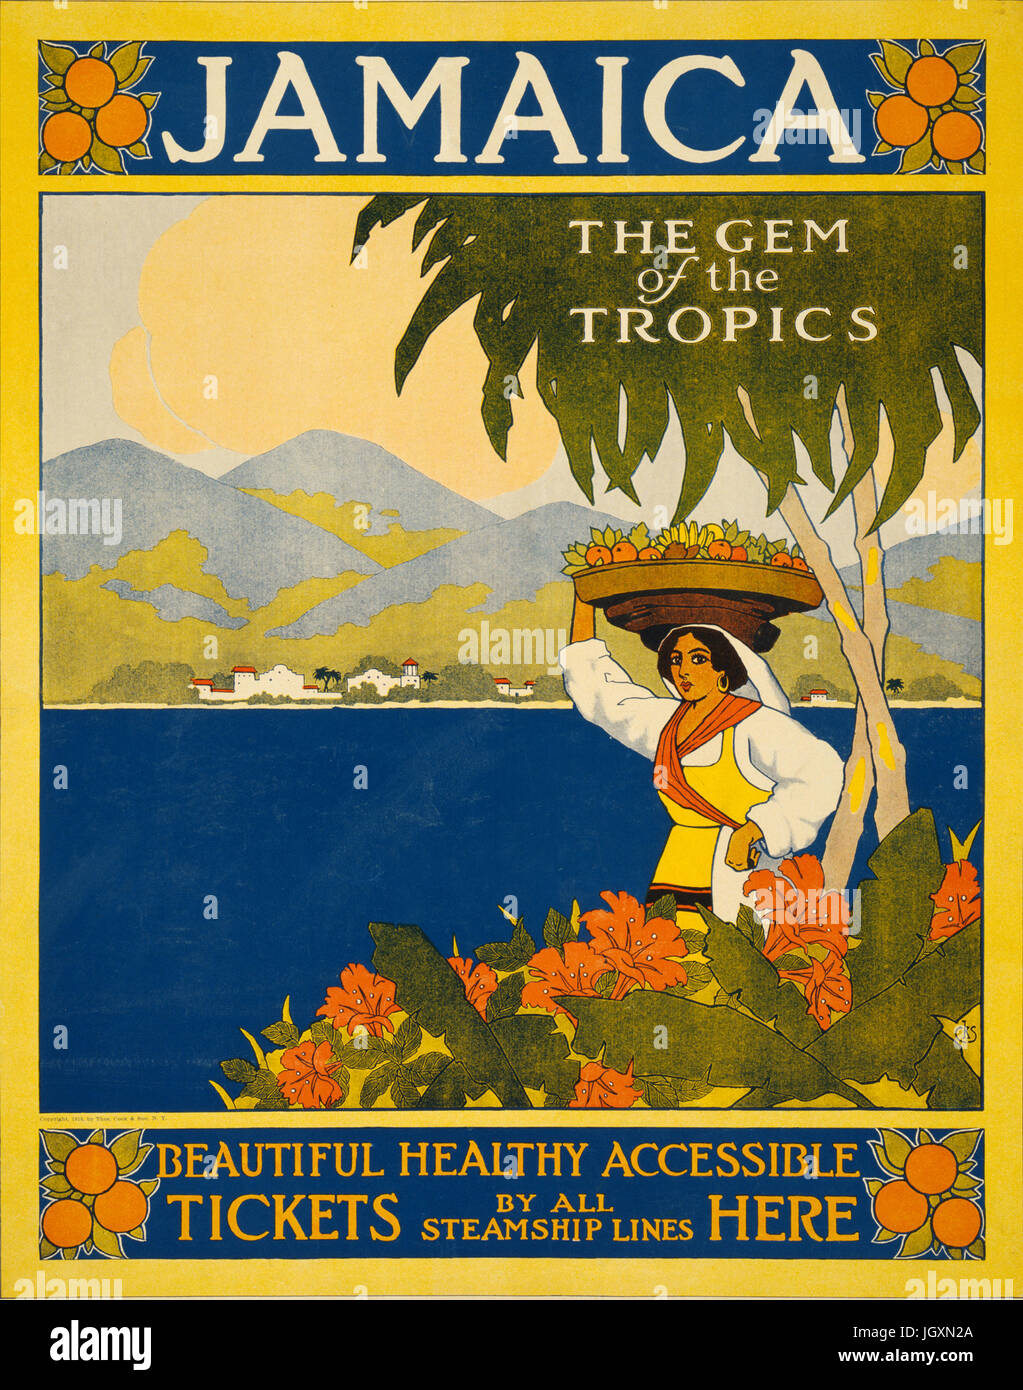 JAMAICA travel poster published by Thomas Cook company about 1910 Stock Photo